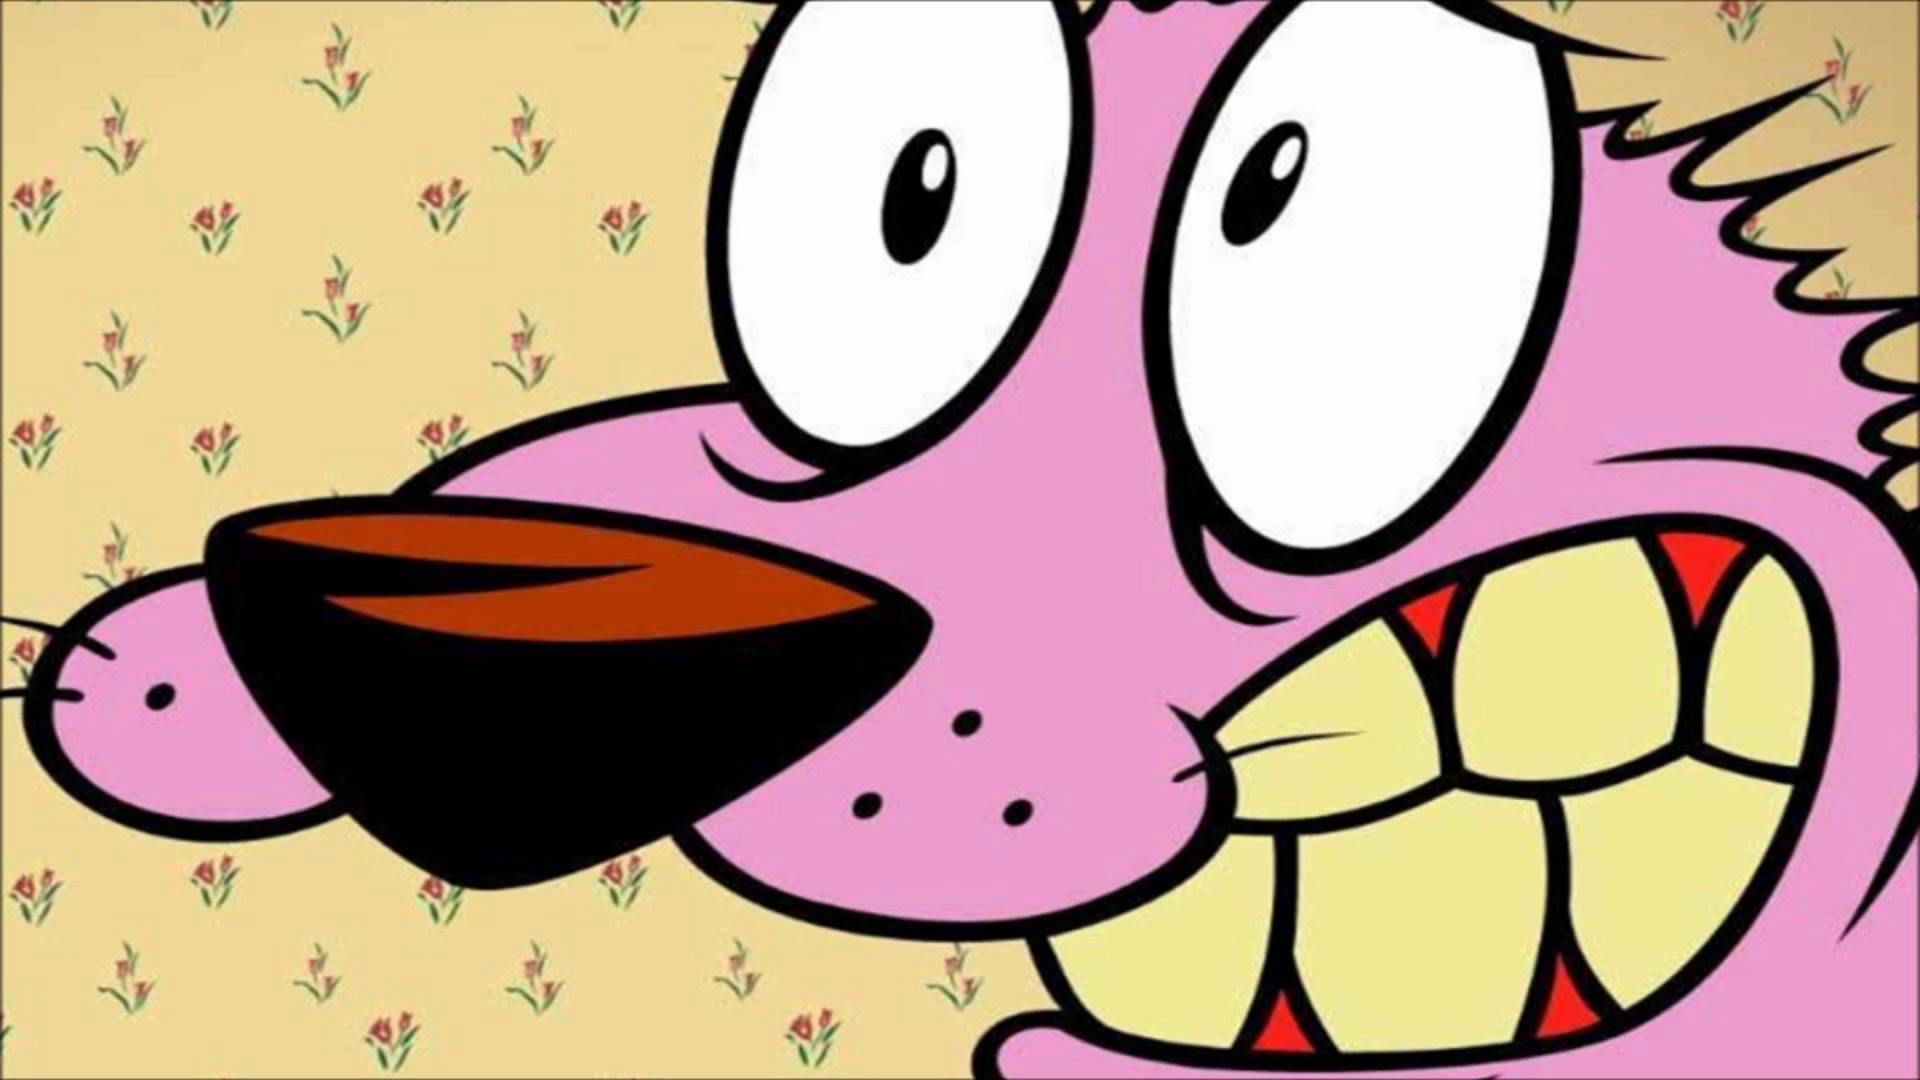 Courage The Cowardly Dog Wallpaper HD 93kj2gy 4usky